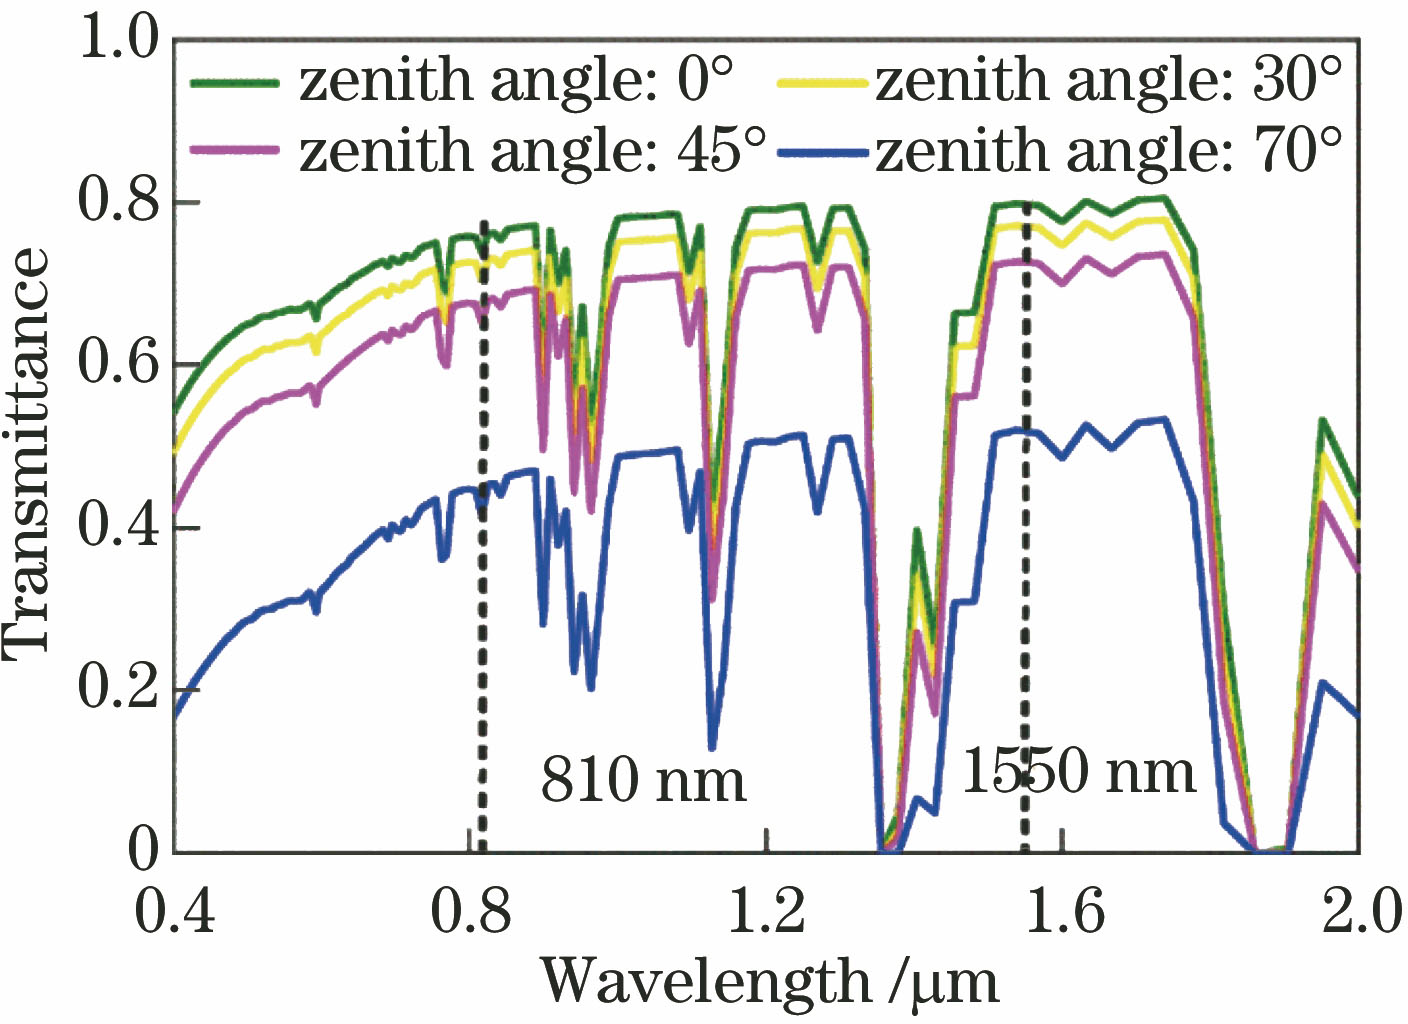 Transmittance of the atmosphere from visible light to near infrared bands at different zenith angles